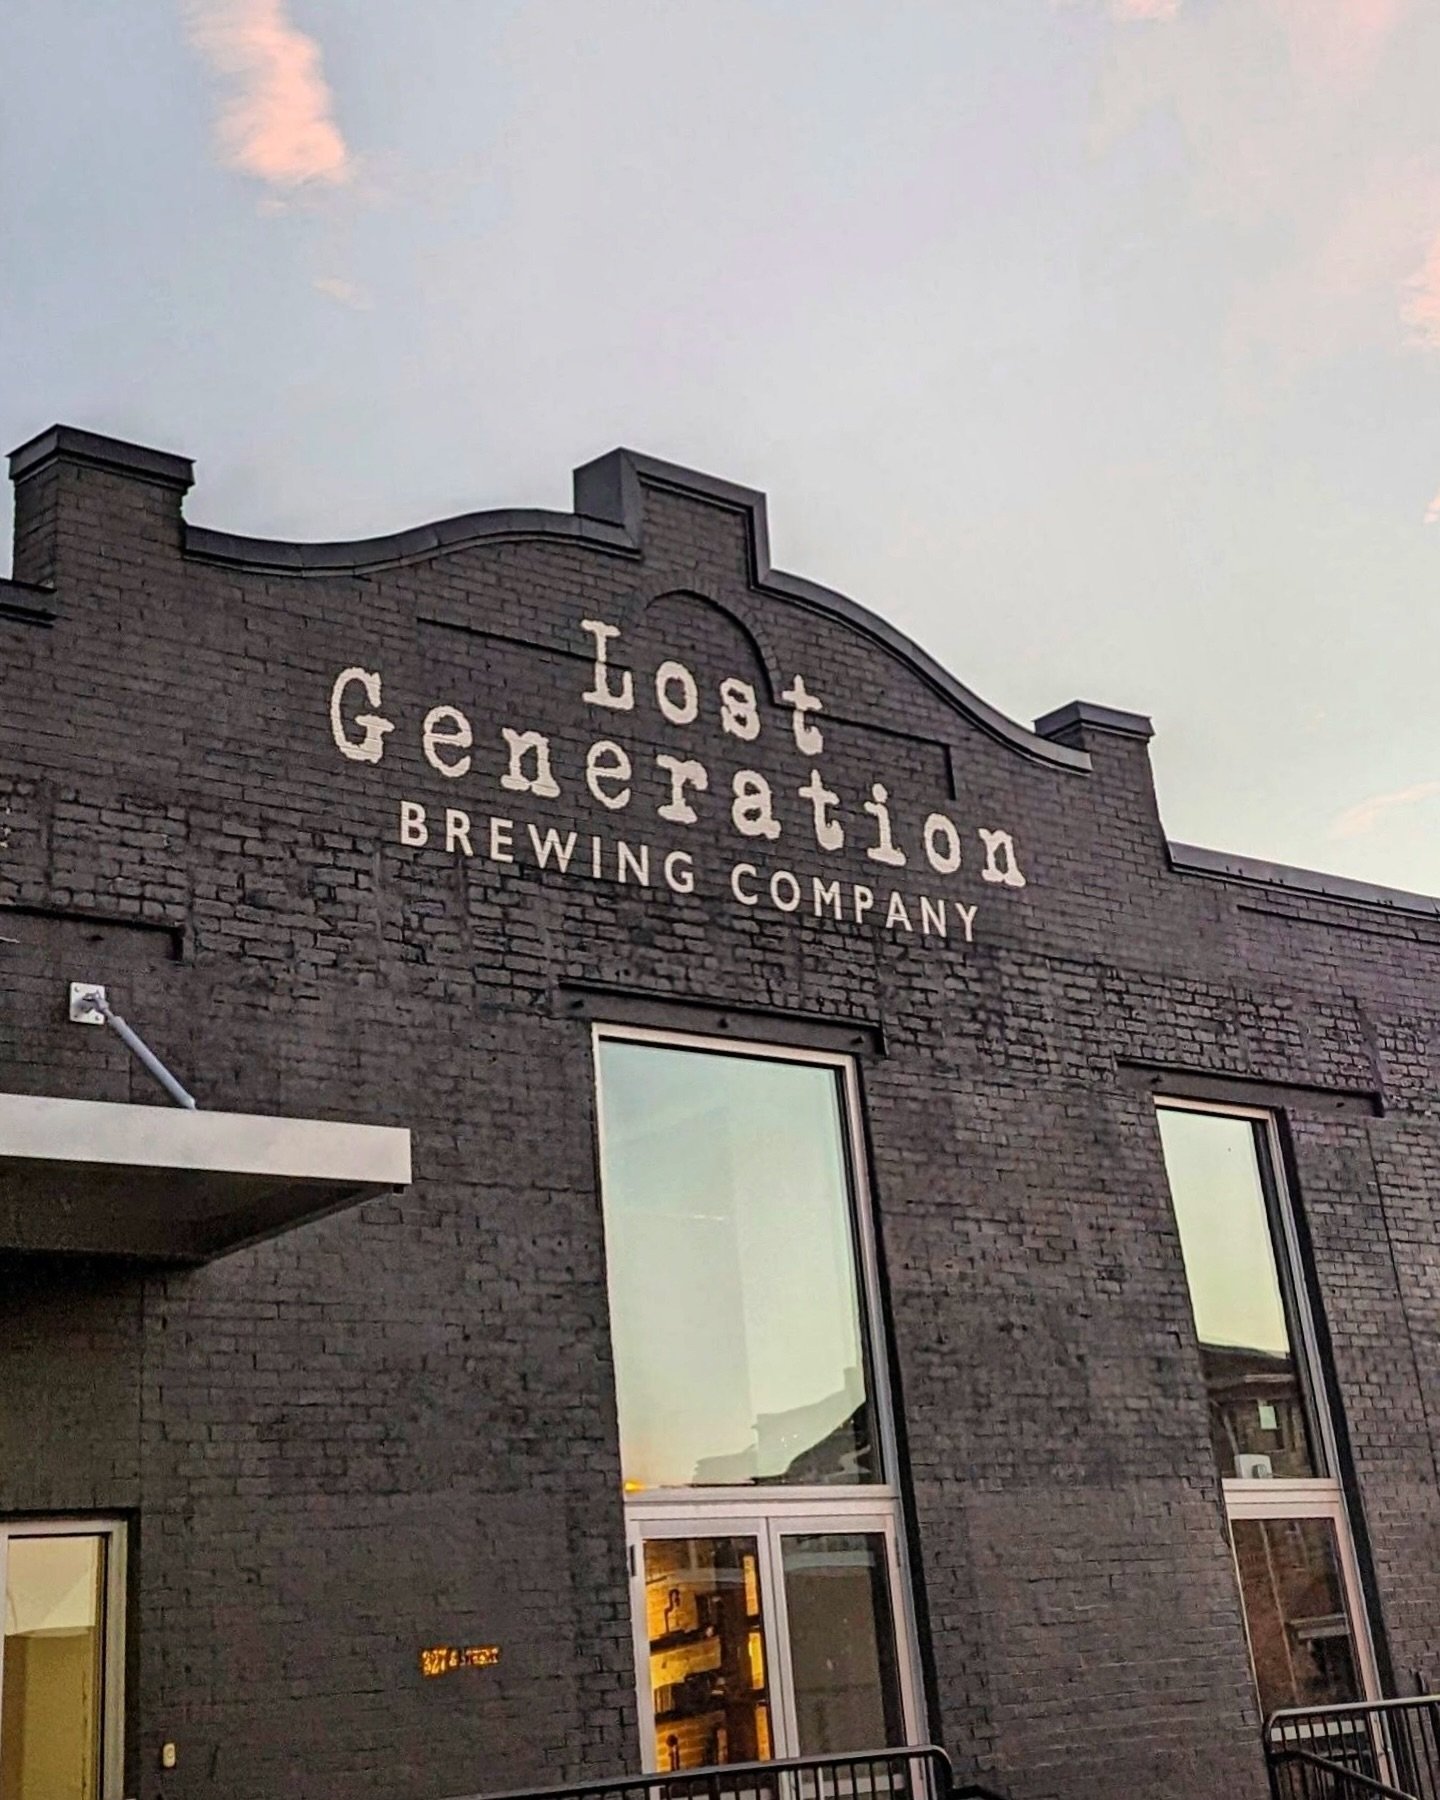 Join us tomorrow morning for our weekend long run! This week we&rsquo;re starting from @lostgenbrewing at 9am for a a five mile loop. 
Stick around after the run for coffee and a special screening of a documentary by @thenoahweeks featuring NETC! ⠀⠀⠀